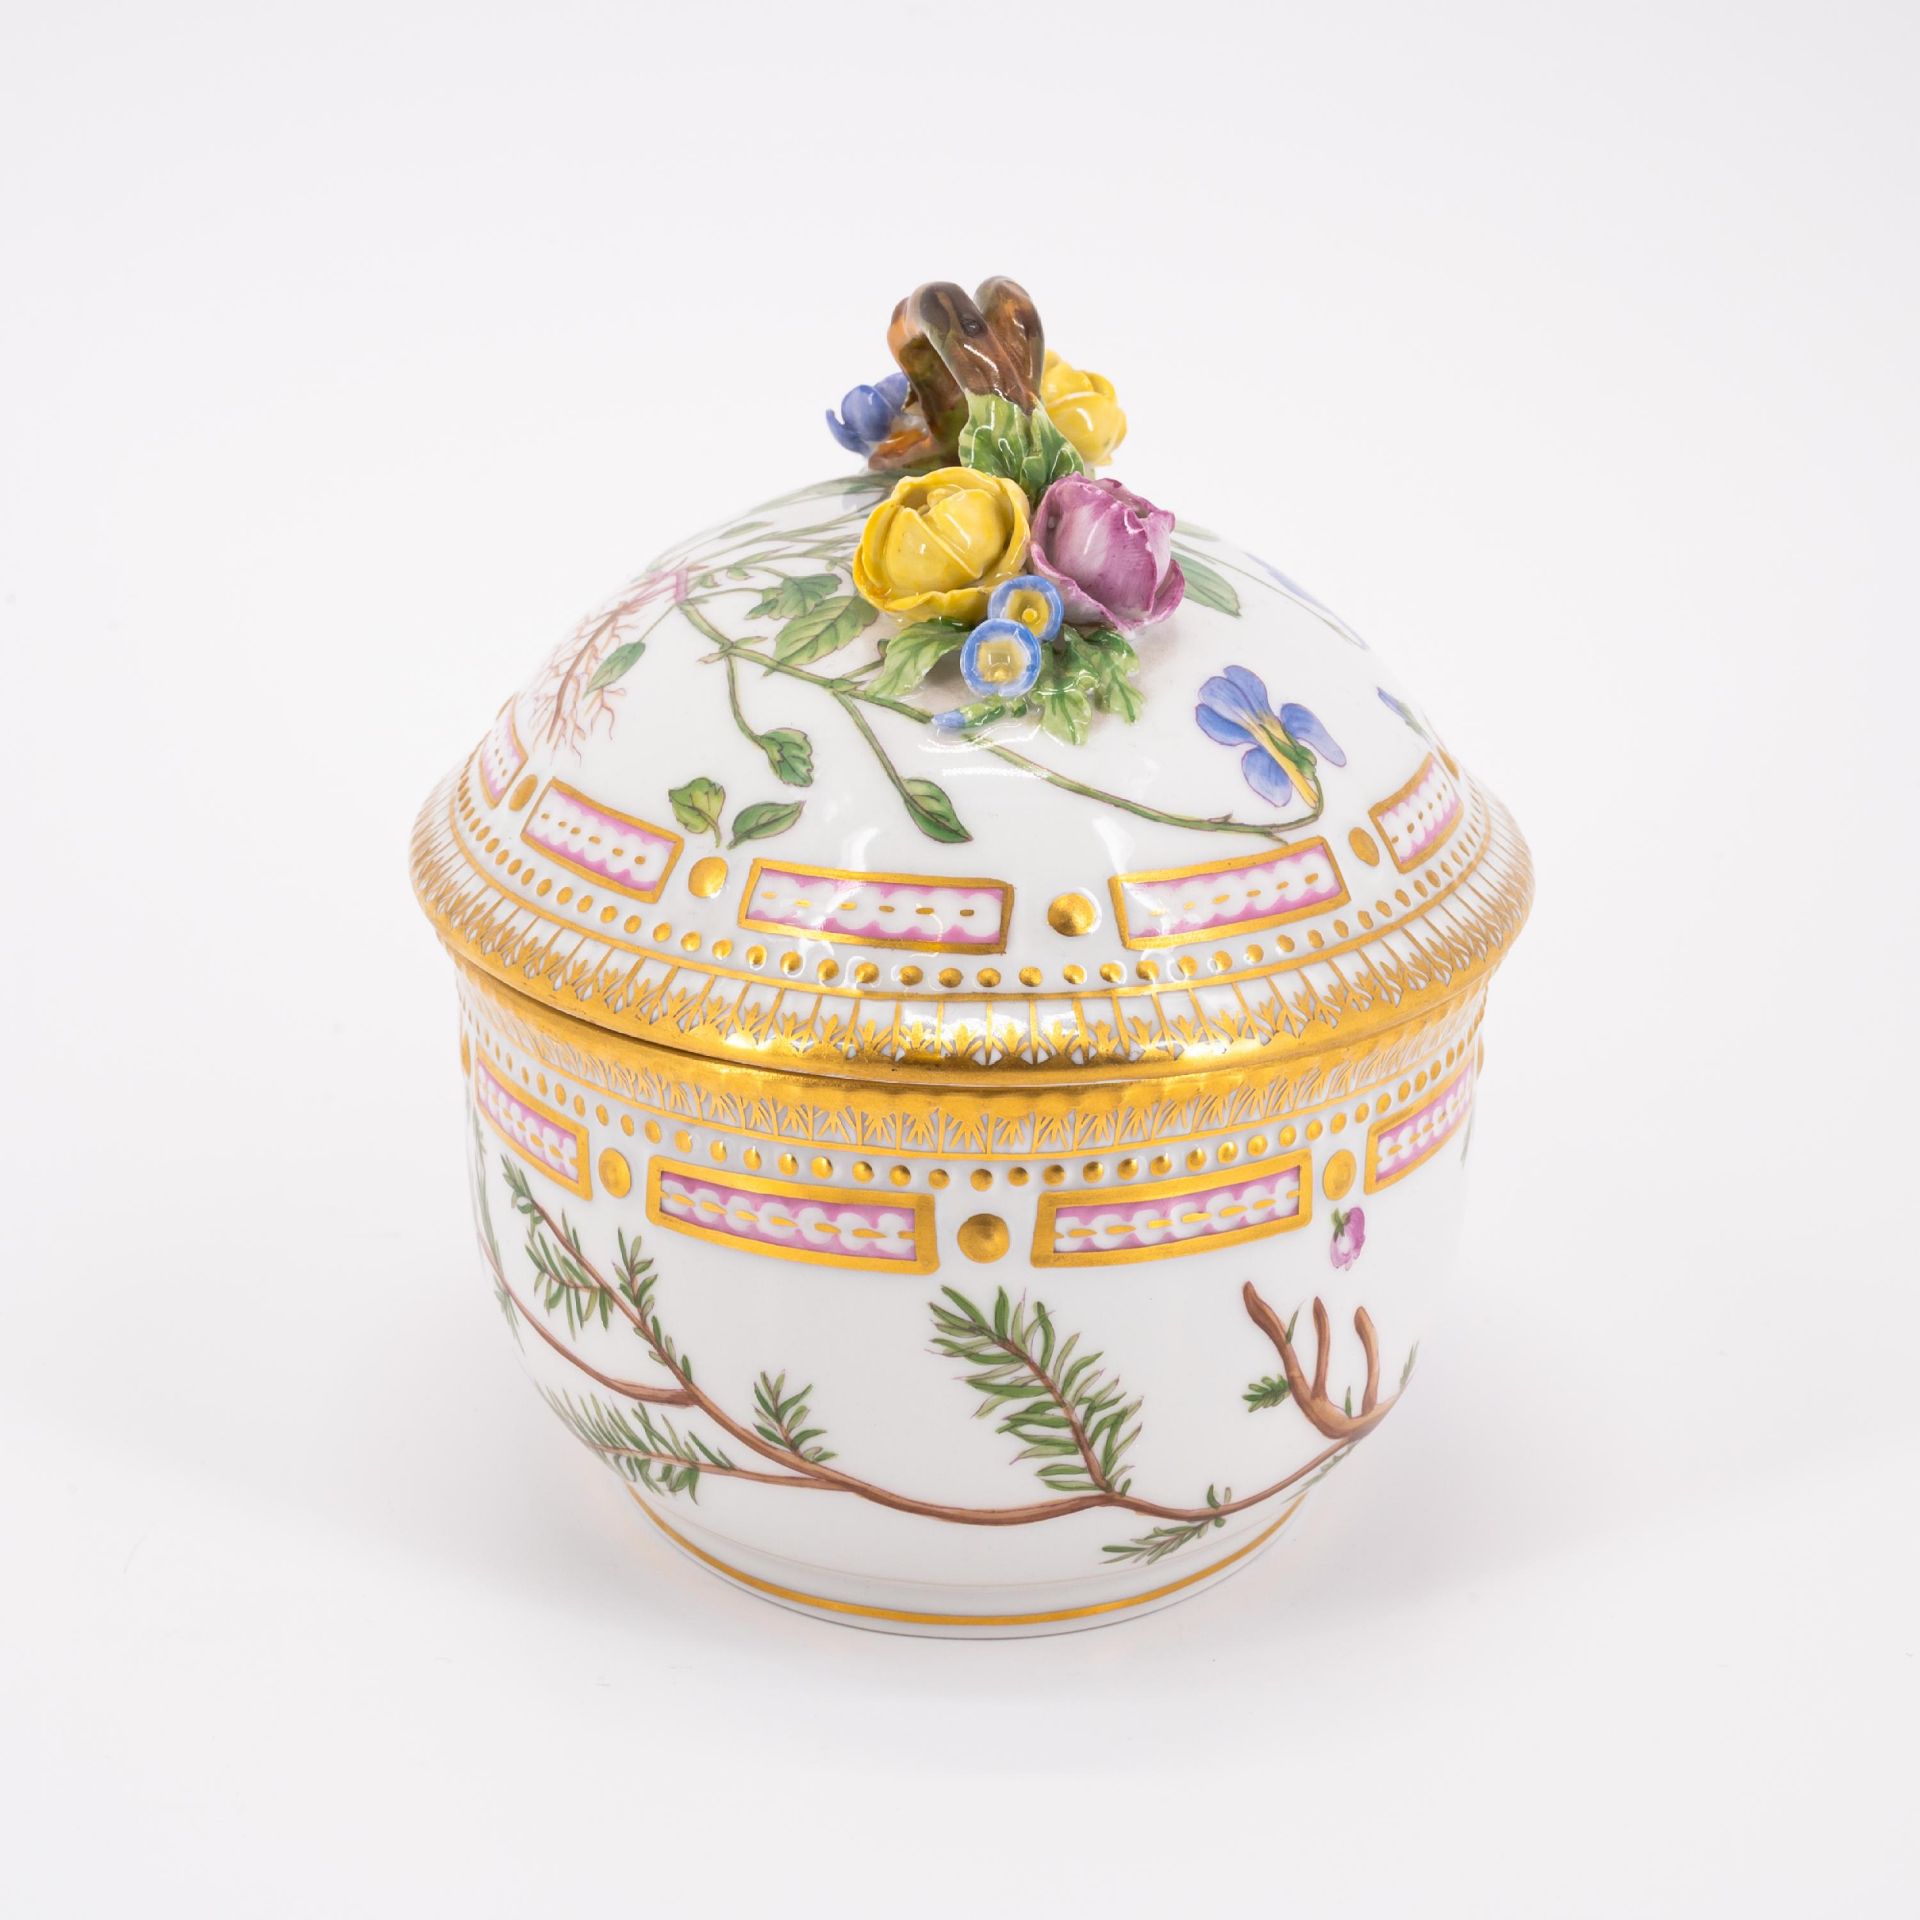 Royal Copenhagen: 95 PIECES FROM A 'FLORA DANICA' DINING SERVICE - Image 13 of 26